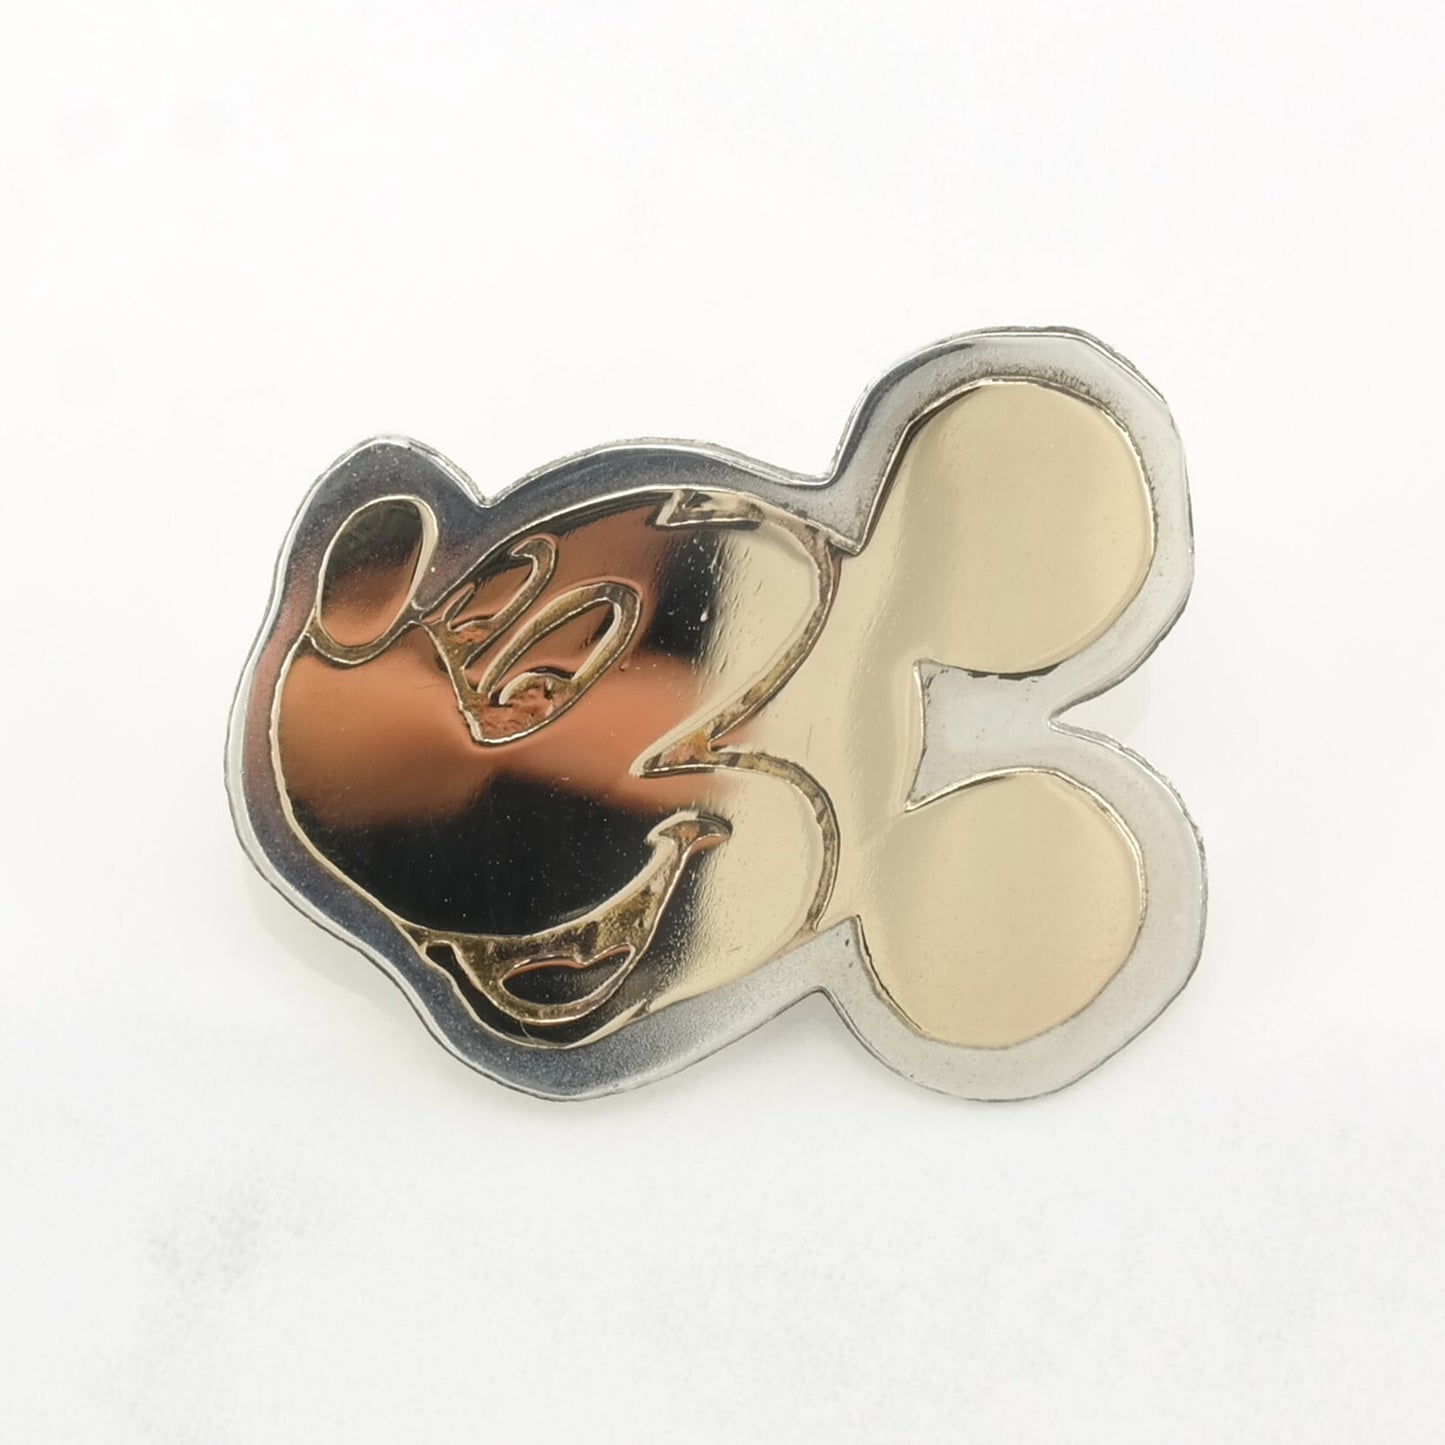 14K Gold Mickey Mouse Sterling Silver Brooch